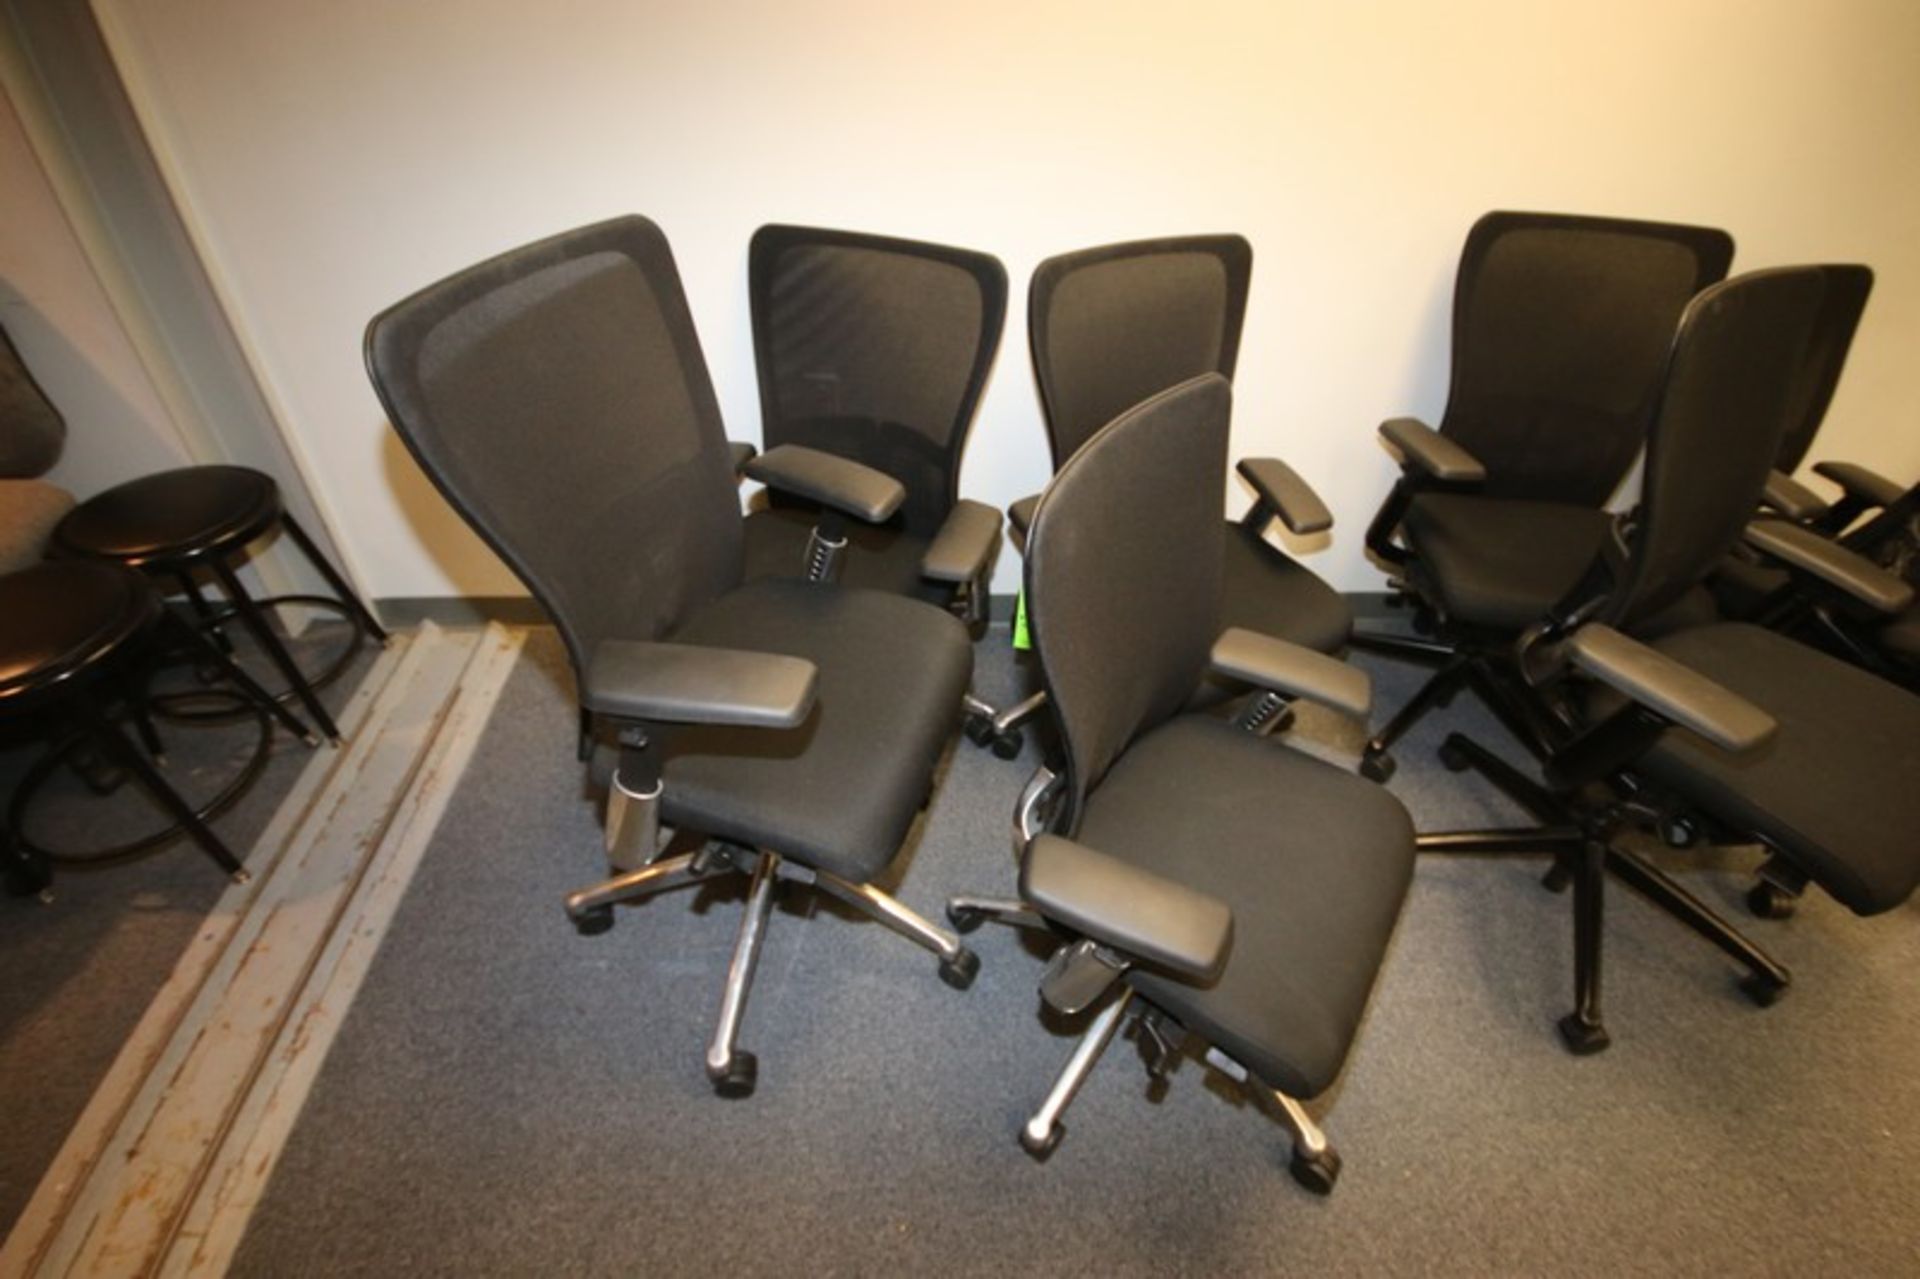 Haworth Zody Task Chairs w/ arms - A high-performing task chair, Zody blends science-based - Image 3 of 3